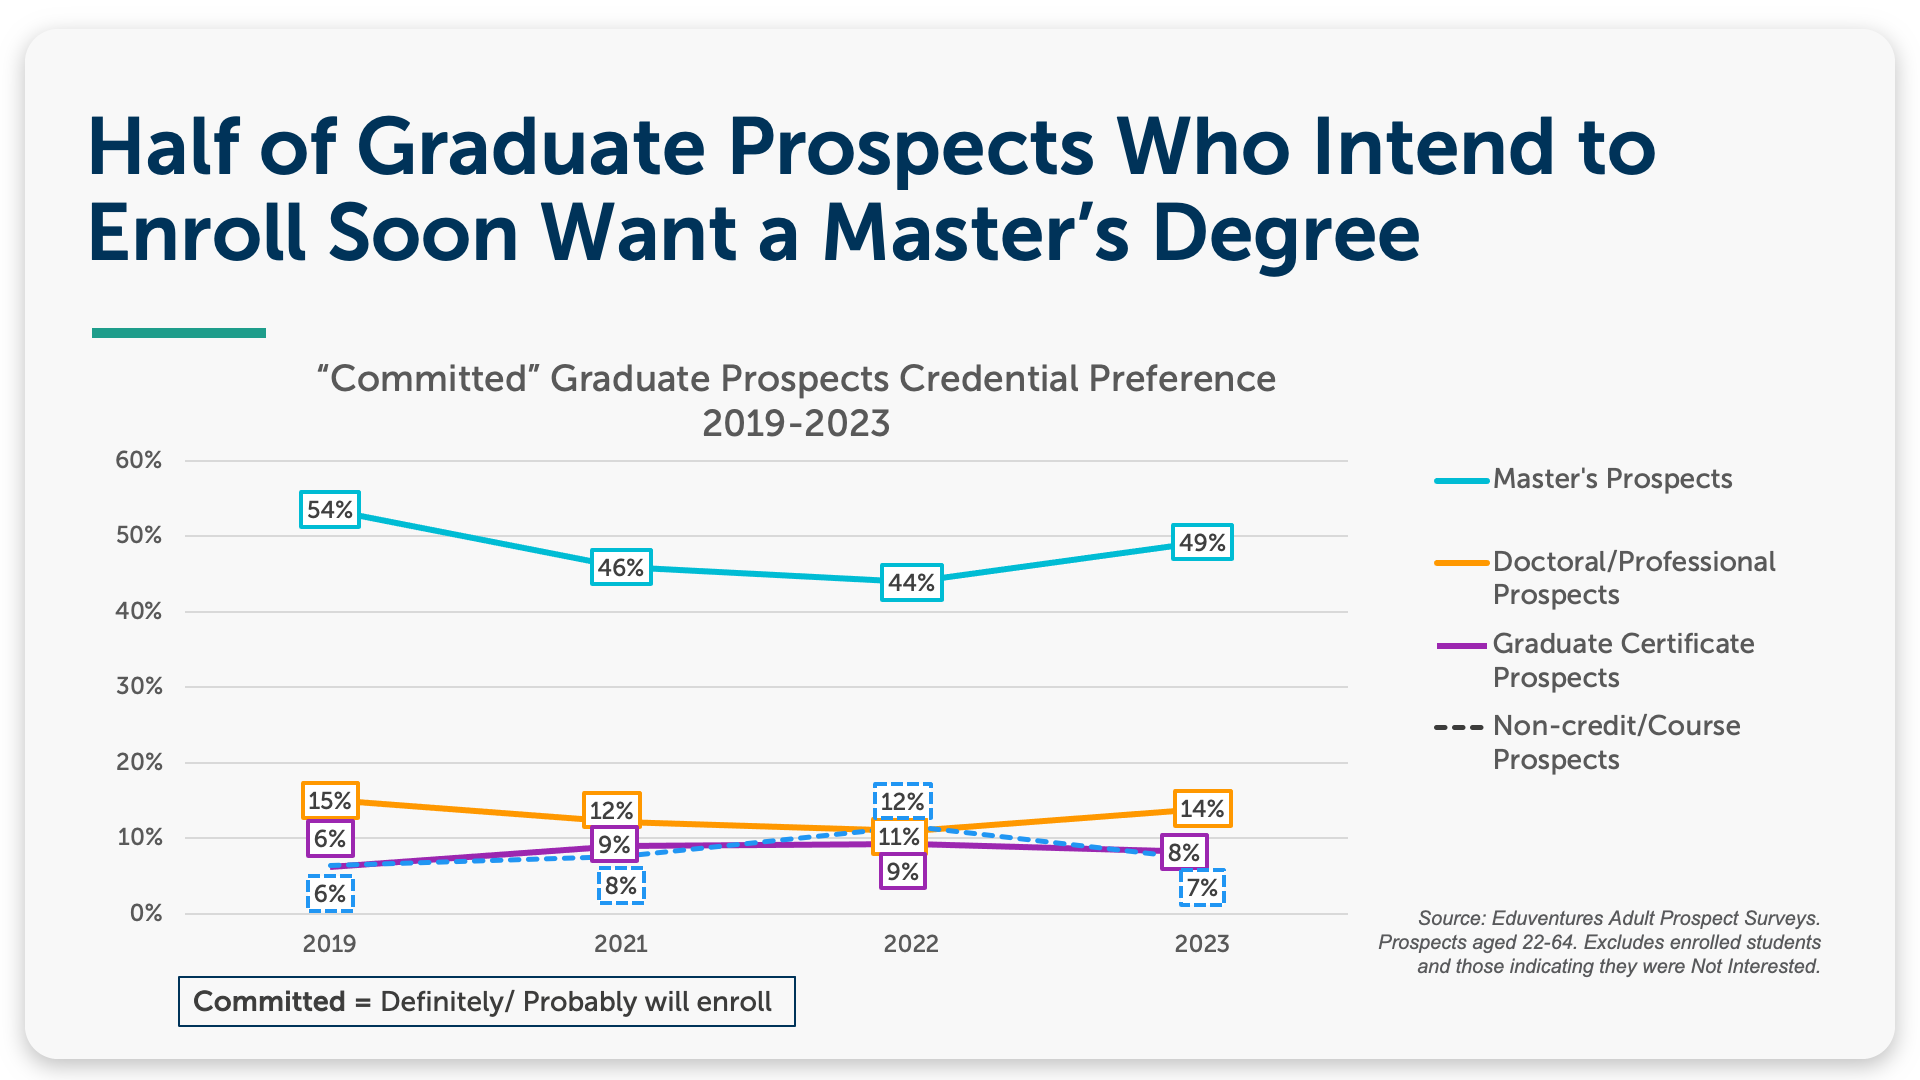 Half of Graduate Prospects Who Intend to Enroll Soon Want a Master's Degree